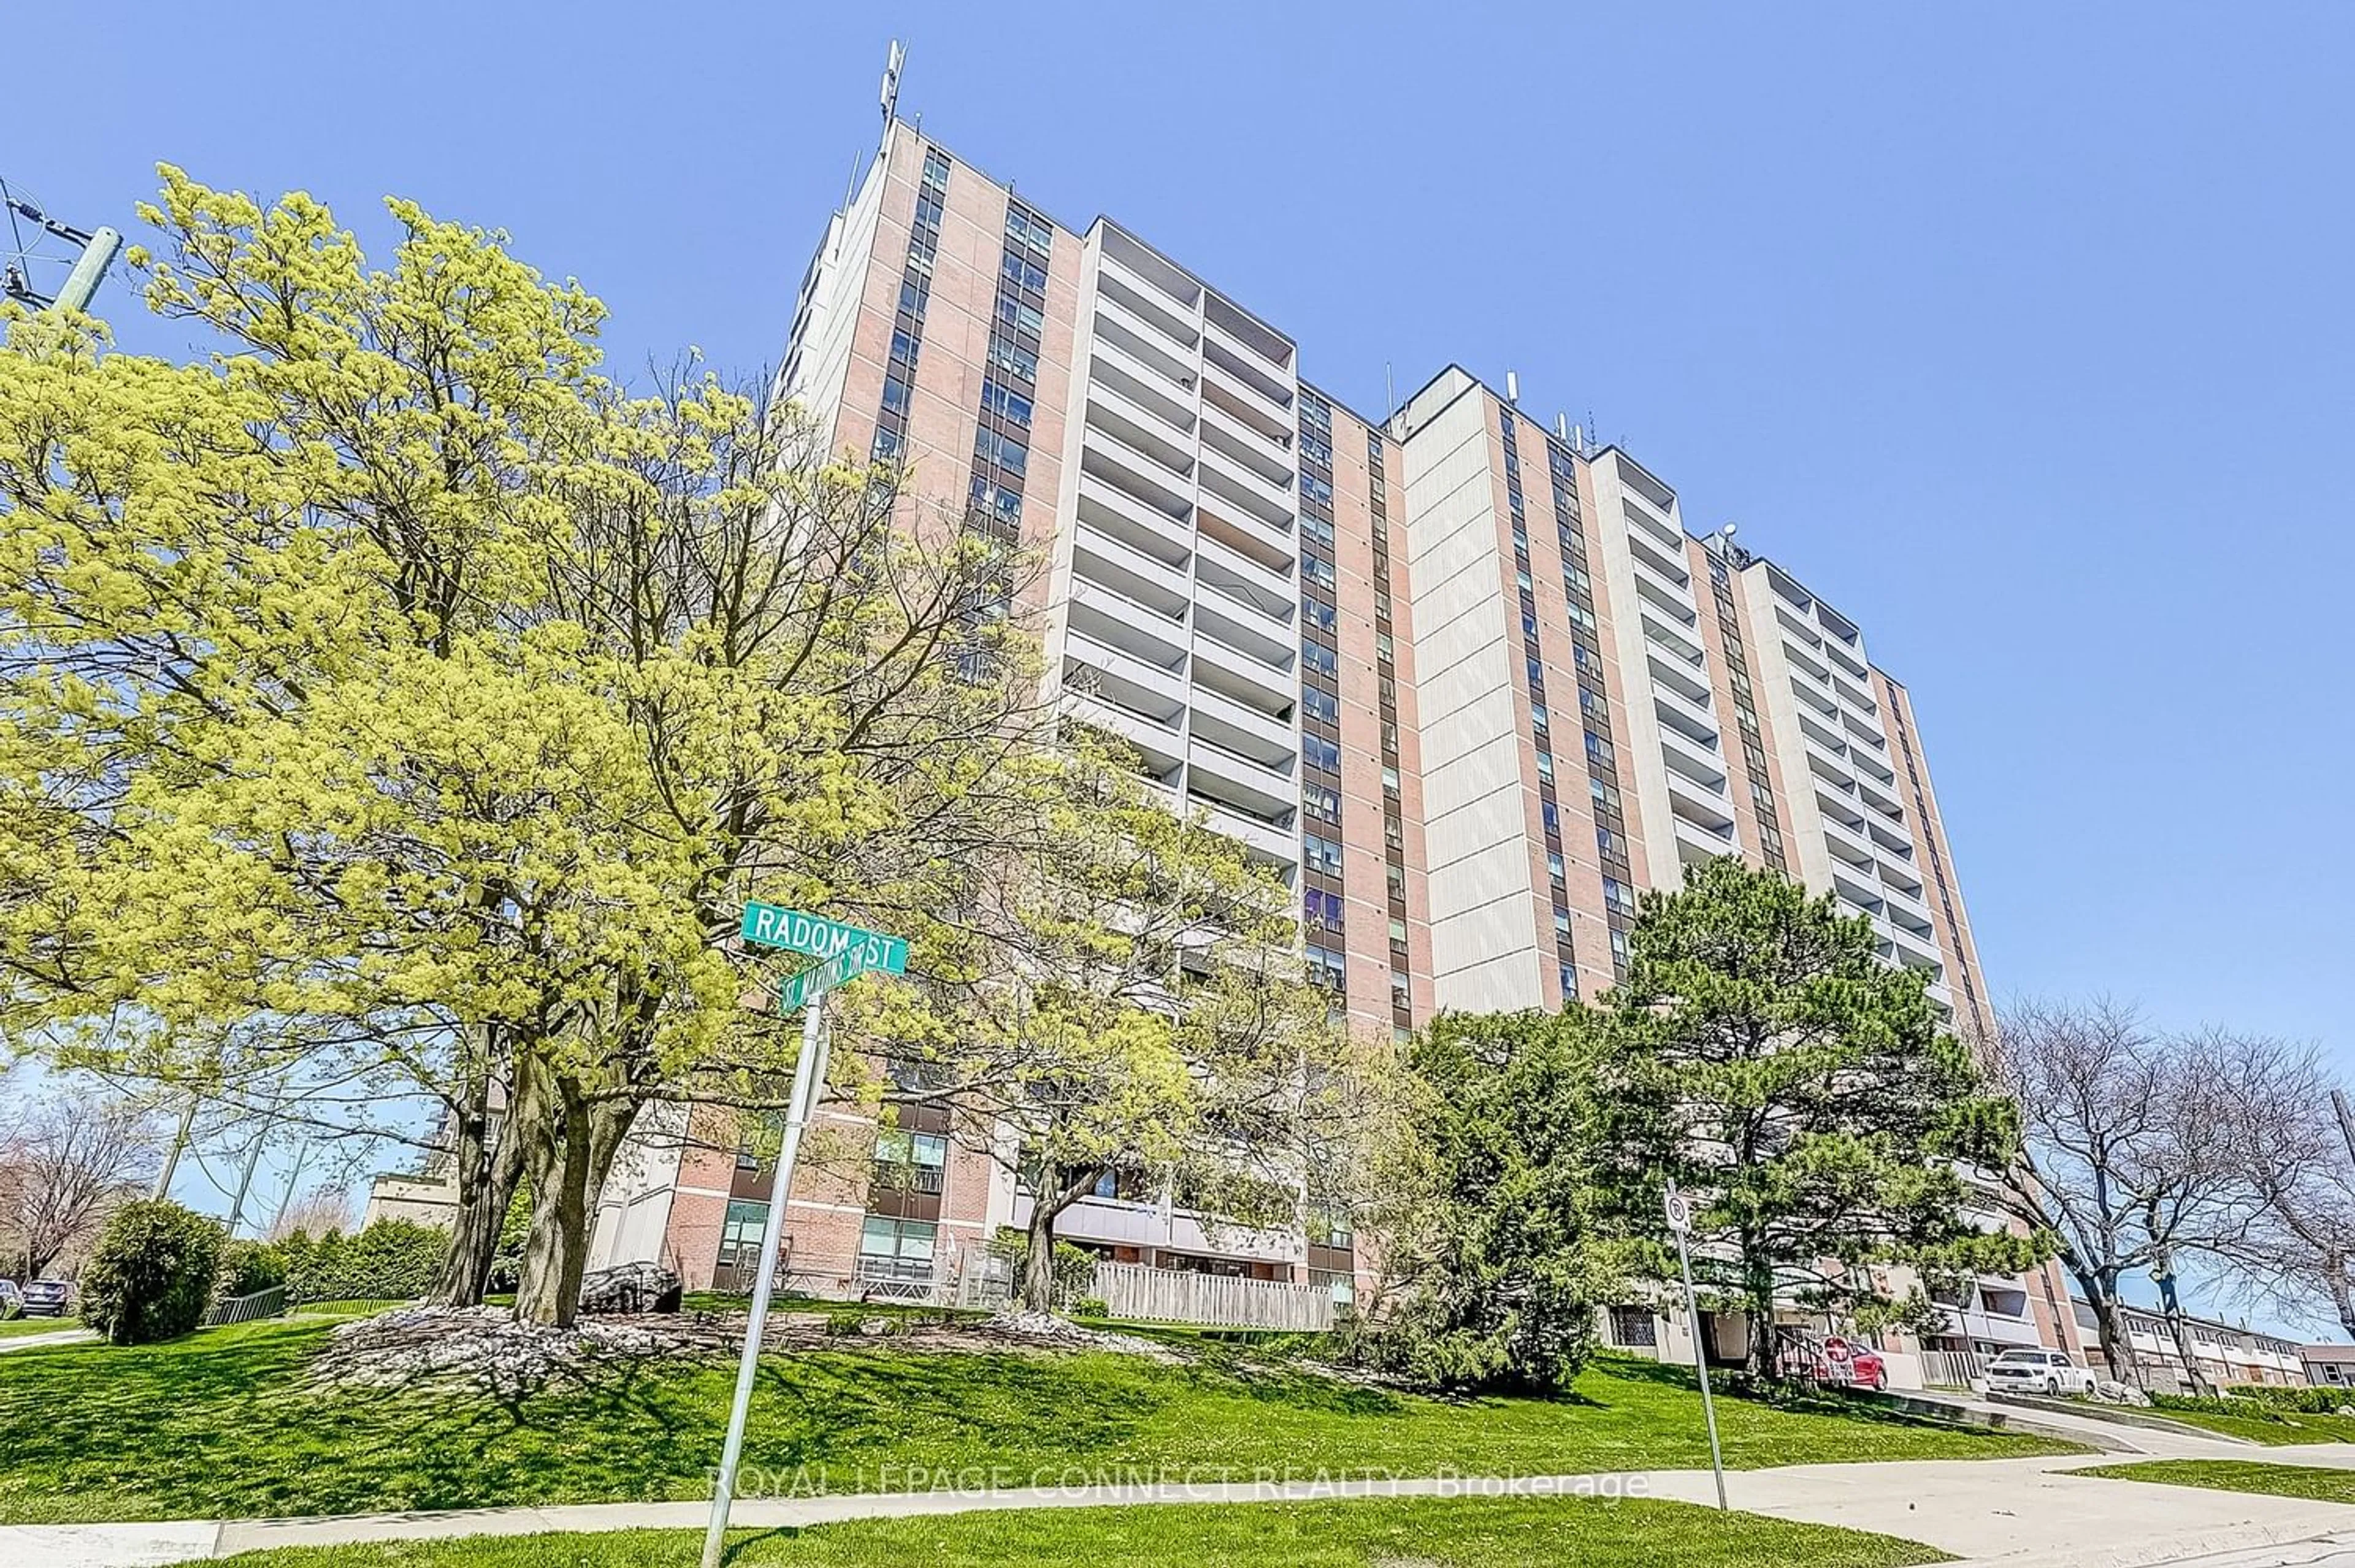 A pic from exterior of the house or condo for 1210 Radom St #906, Pickering Ontario L1W 2Z3